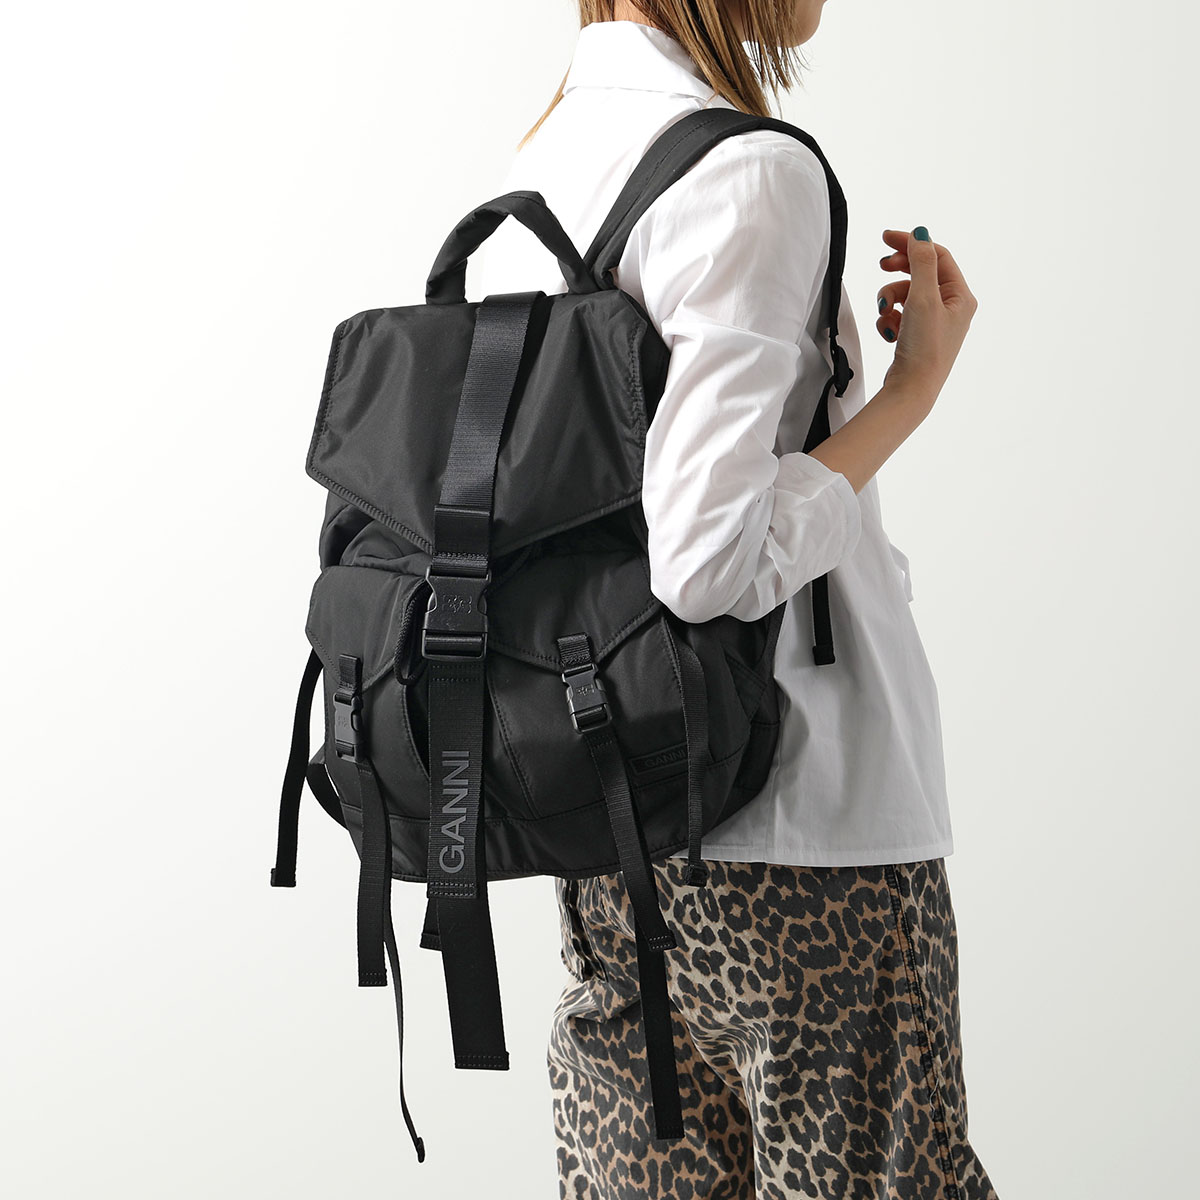 GANNI ガニー バックパック RECYCLED TECH BACKPACK A4755 5829...